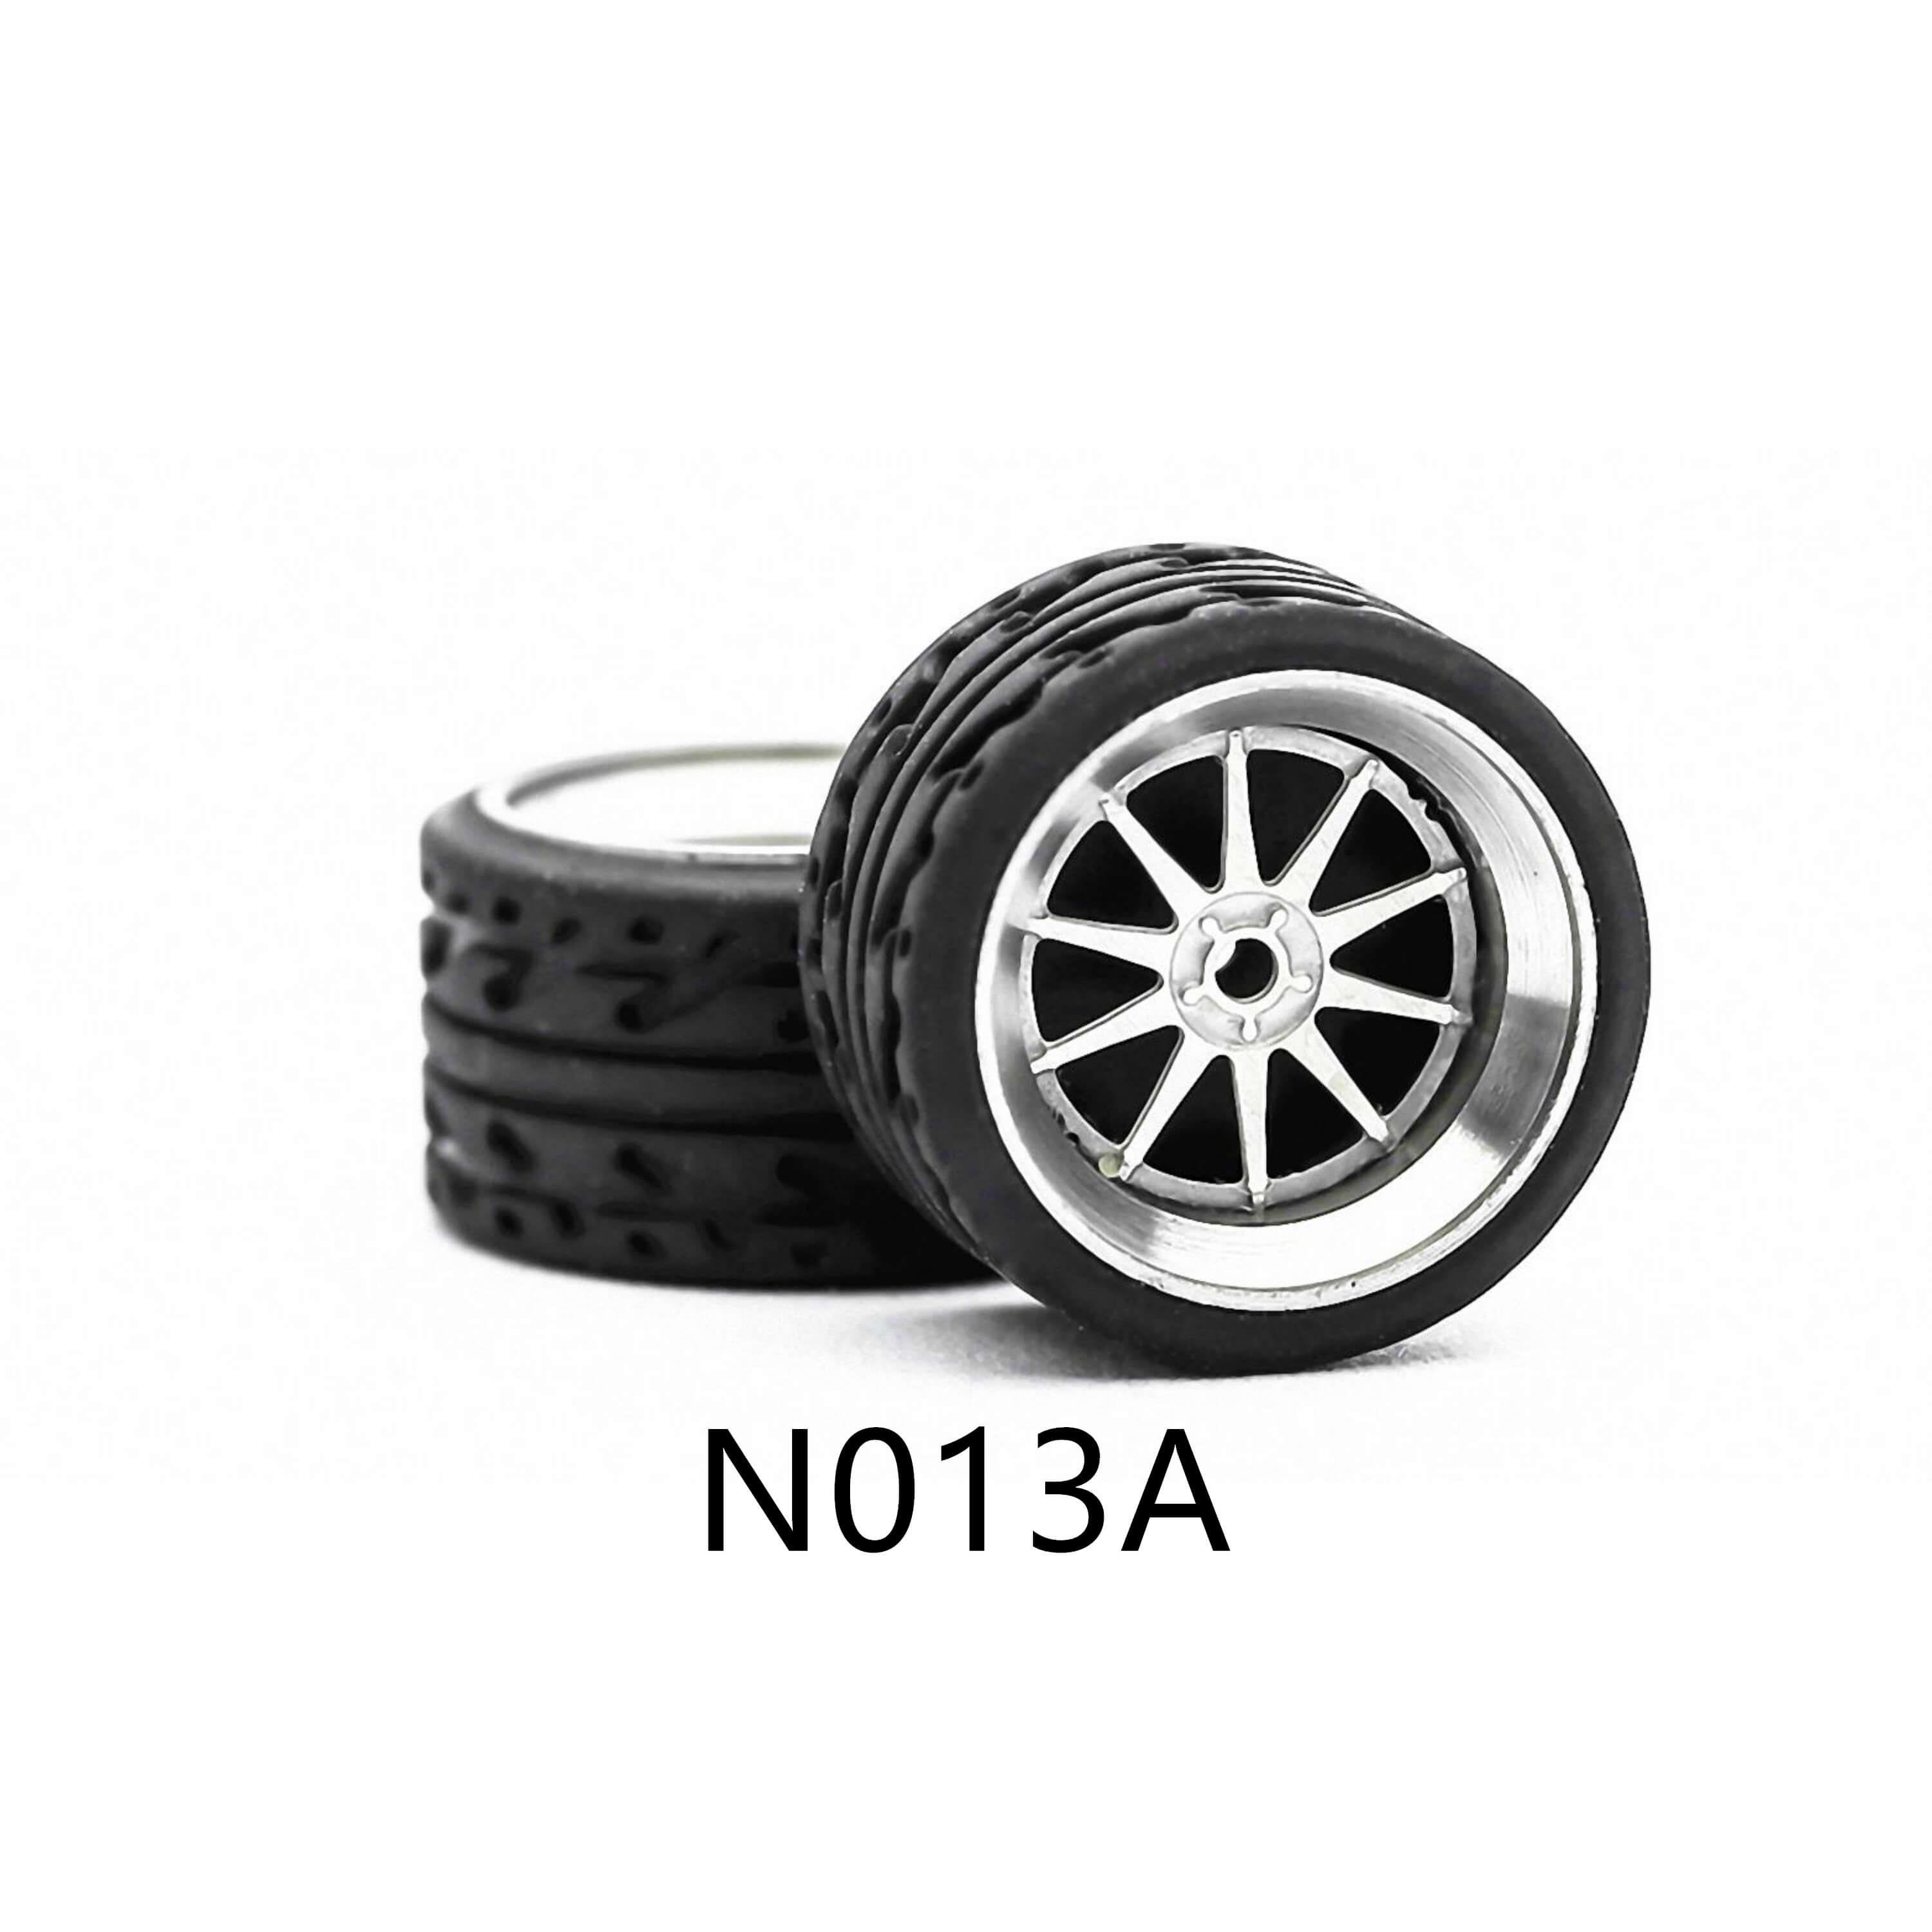 4 Pcs Set Wheels Rubber Tire 1/64 Scale Universal For Tomica Hotwheels Kyosho Greenlight - 164model